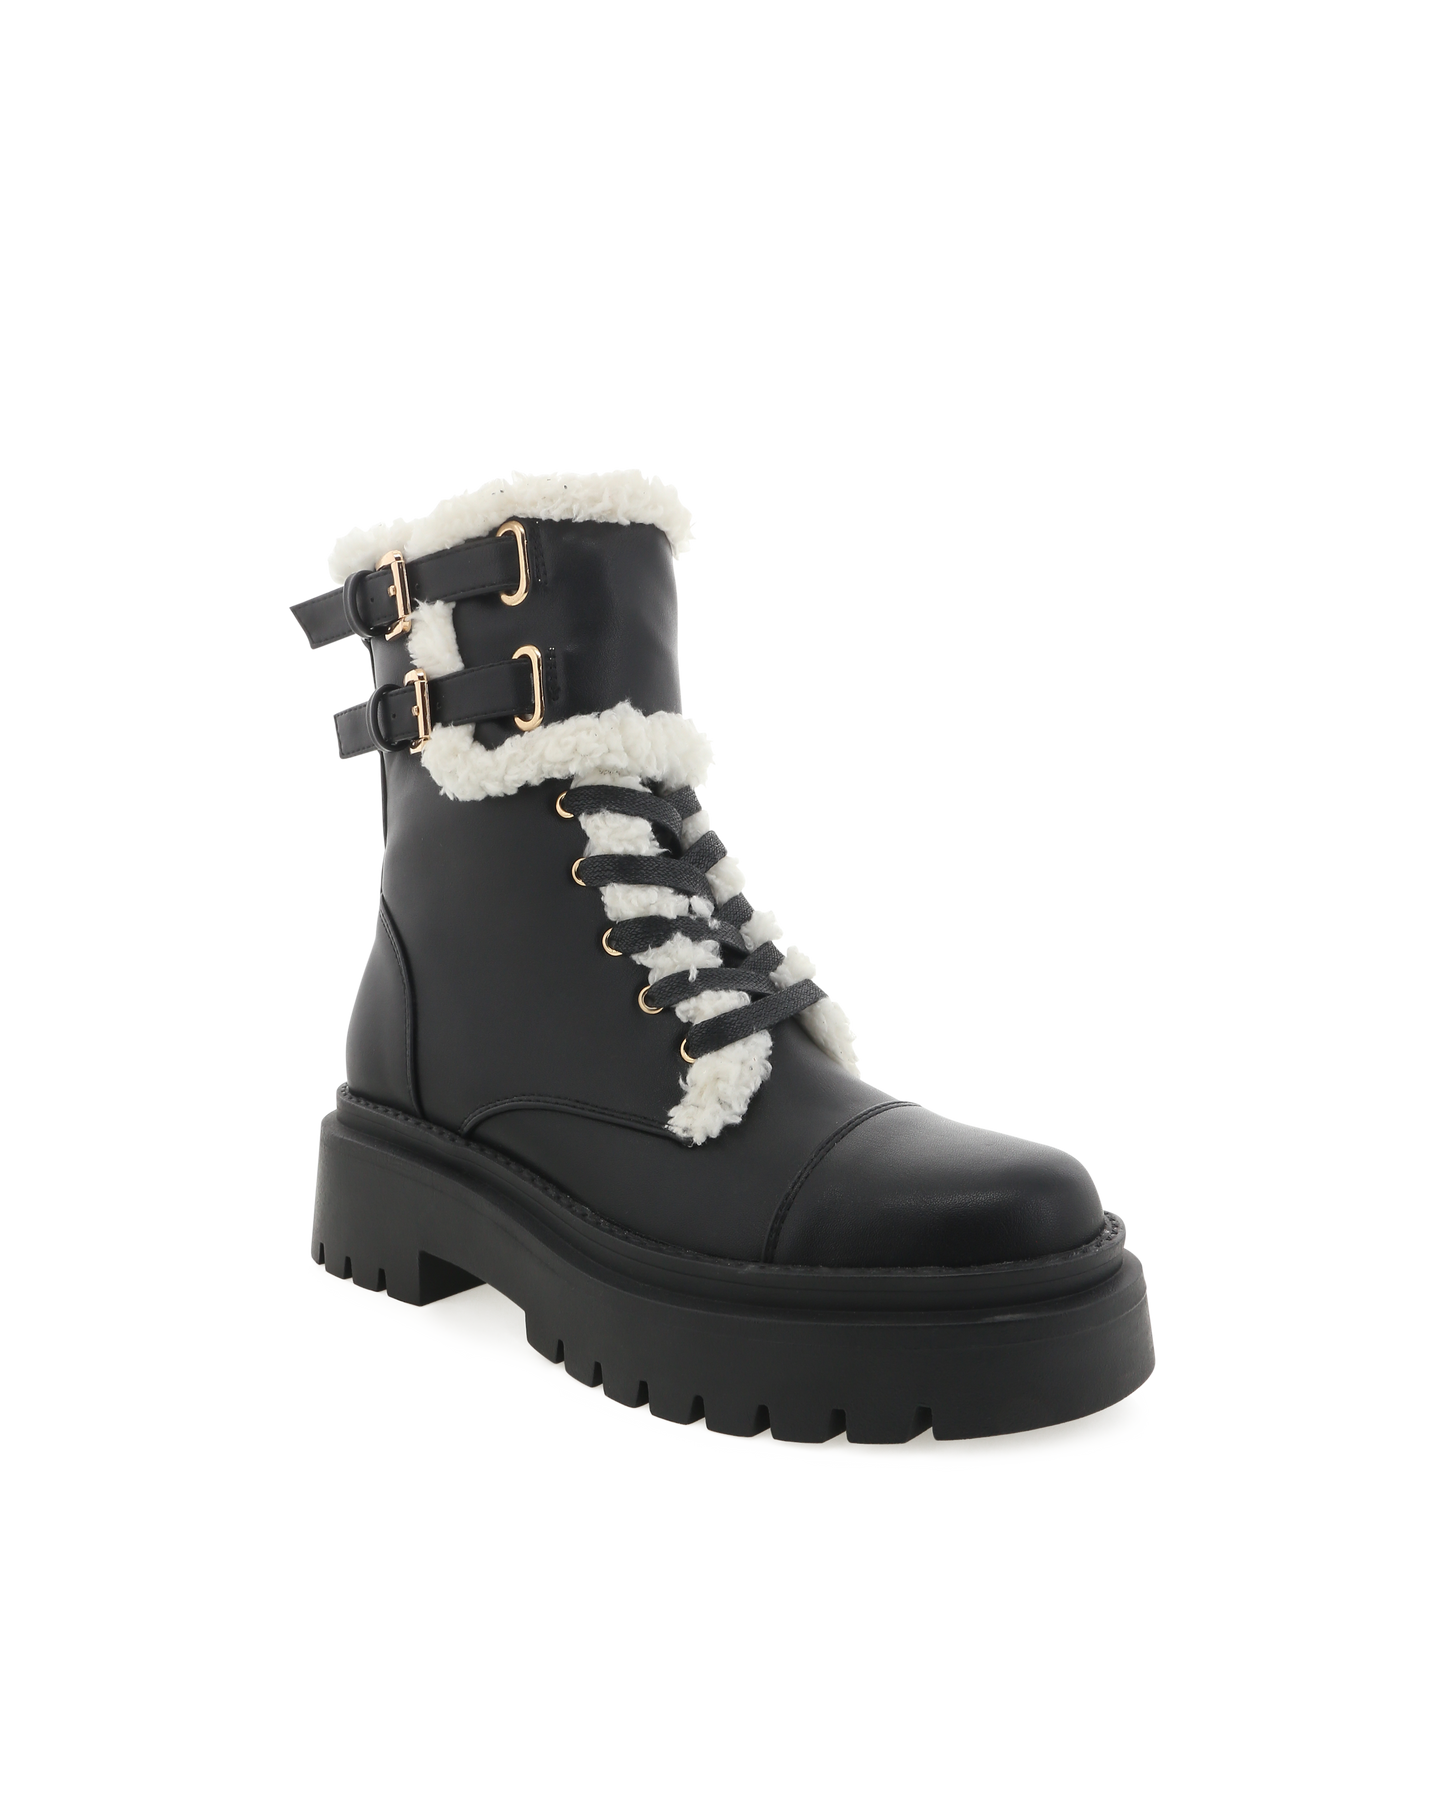 Womens Black Combat Boot With Shearling Lining and a double buckle.feature at the ankle. Gold detailing.